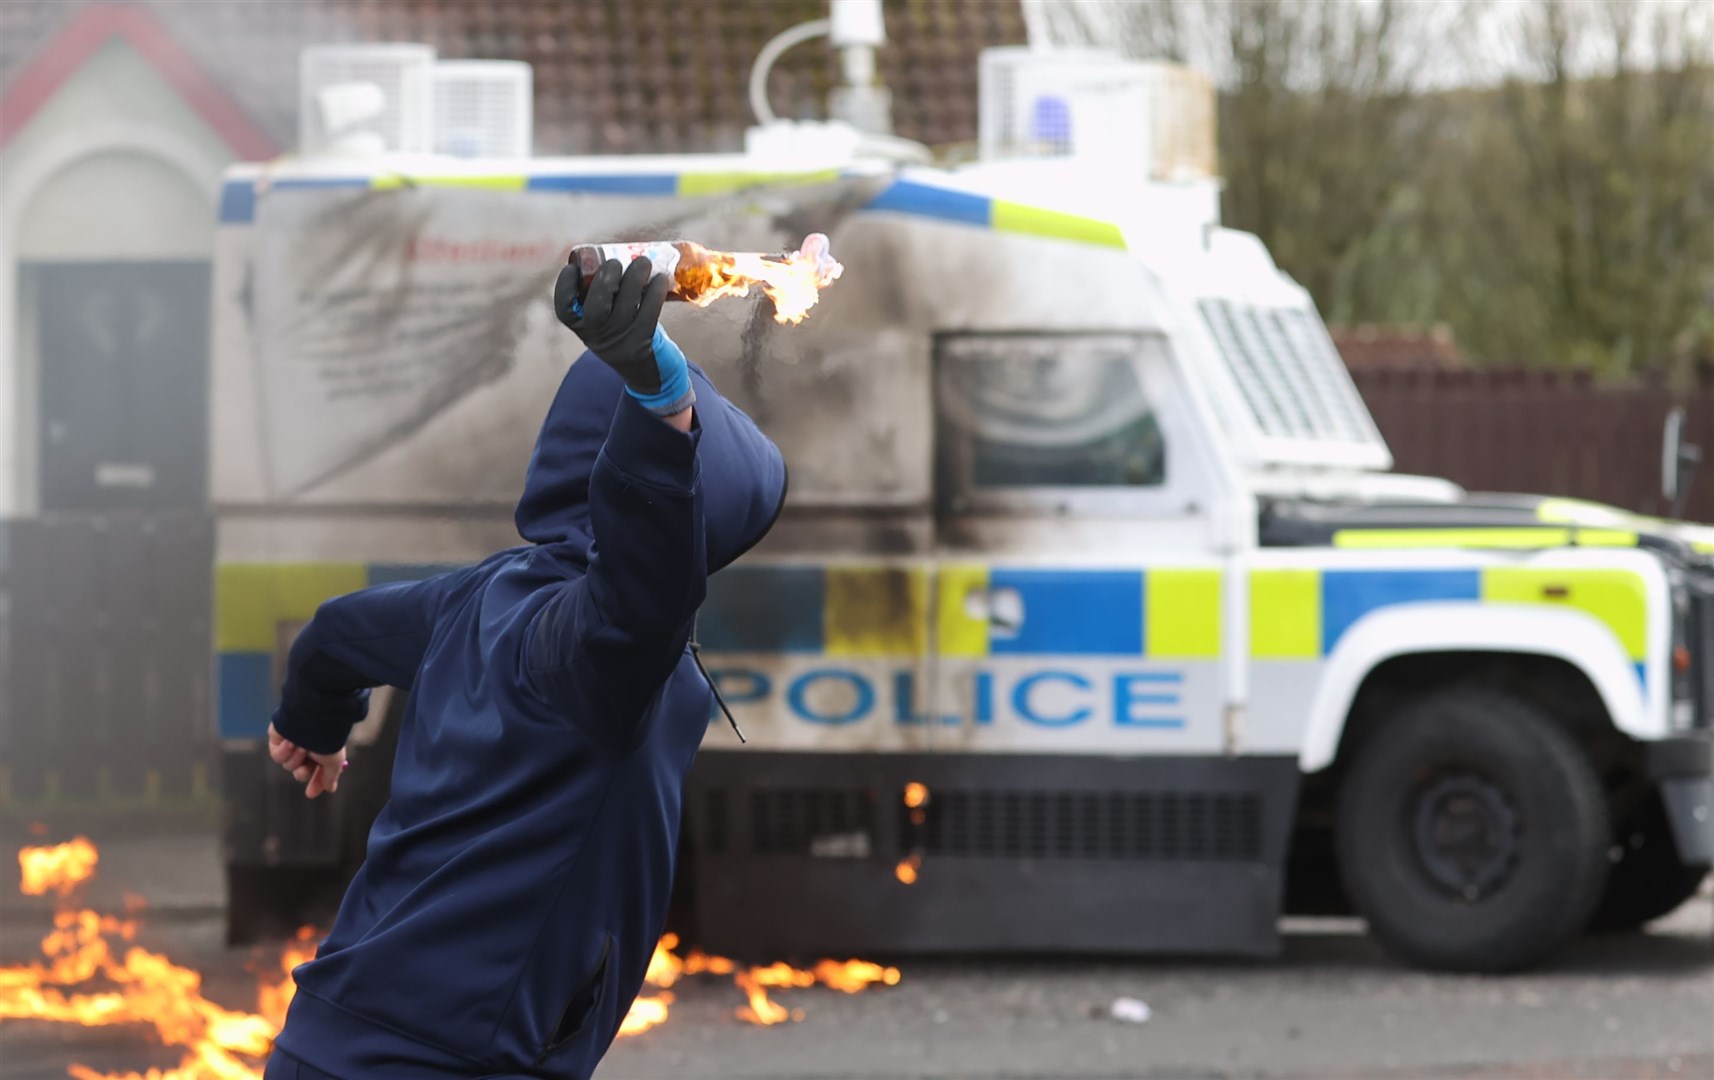 Youths throw petrol bombs at a PSNI vehicle ahead of a dissident Republican parade in the Creggan area of Londonderry on Easter Monday (Liam McBurney/PA)